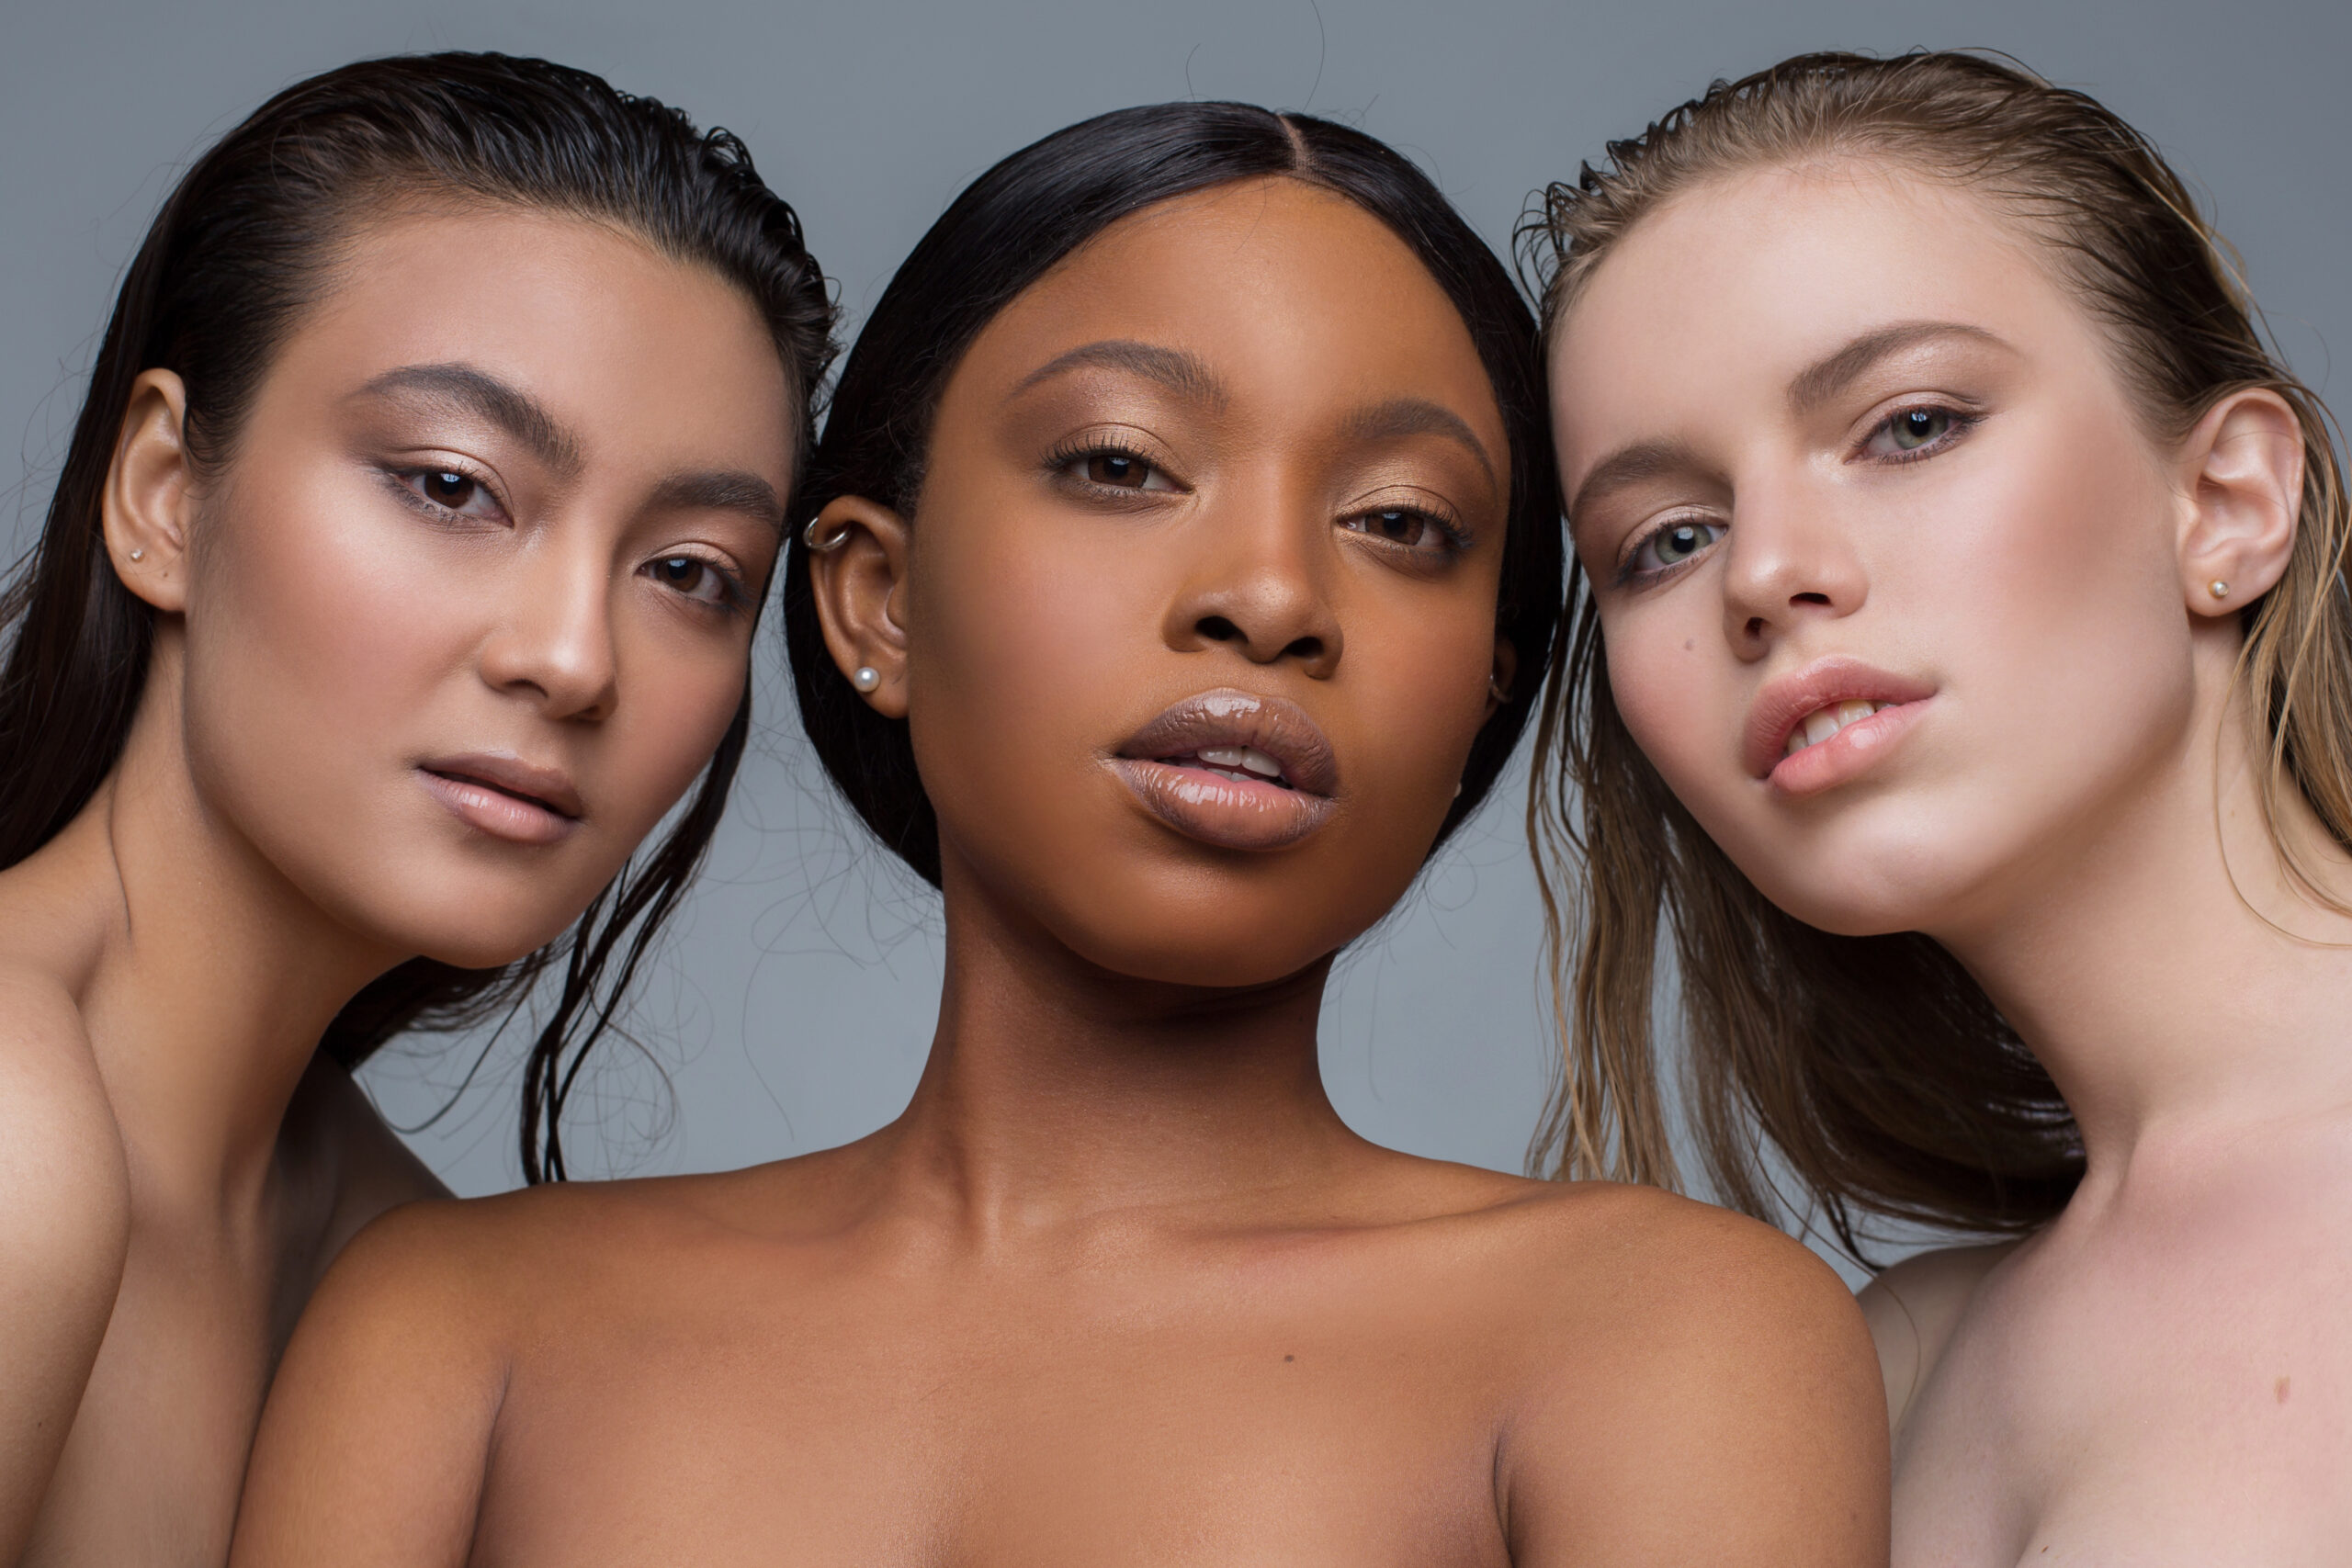 Beauty portrait of three mixed races women with natural make up and healthy skin. On gray background. Portrait caucasian and african american and asian girls different skintone